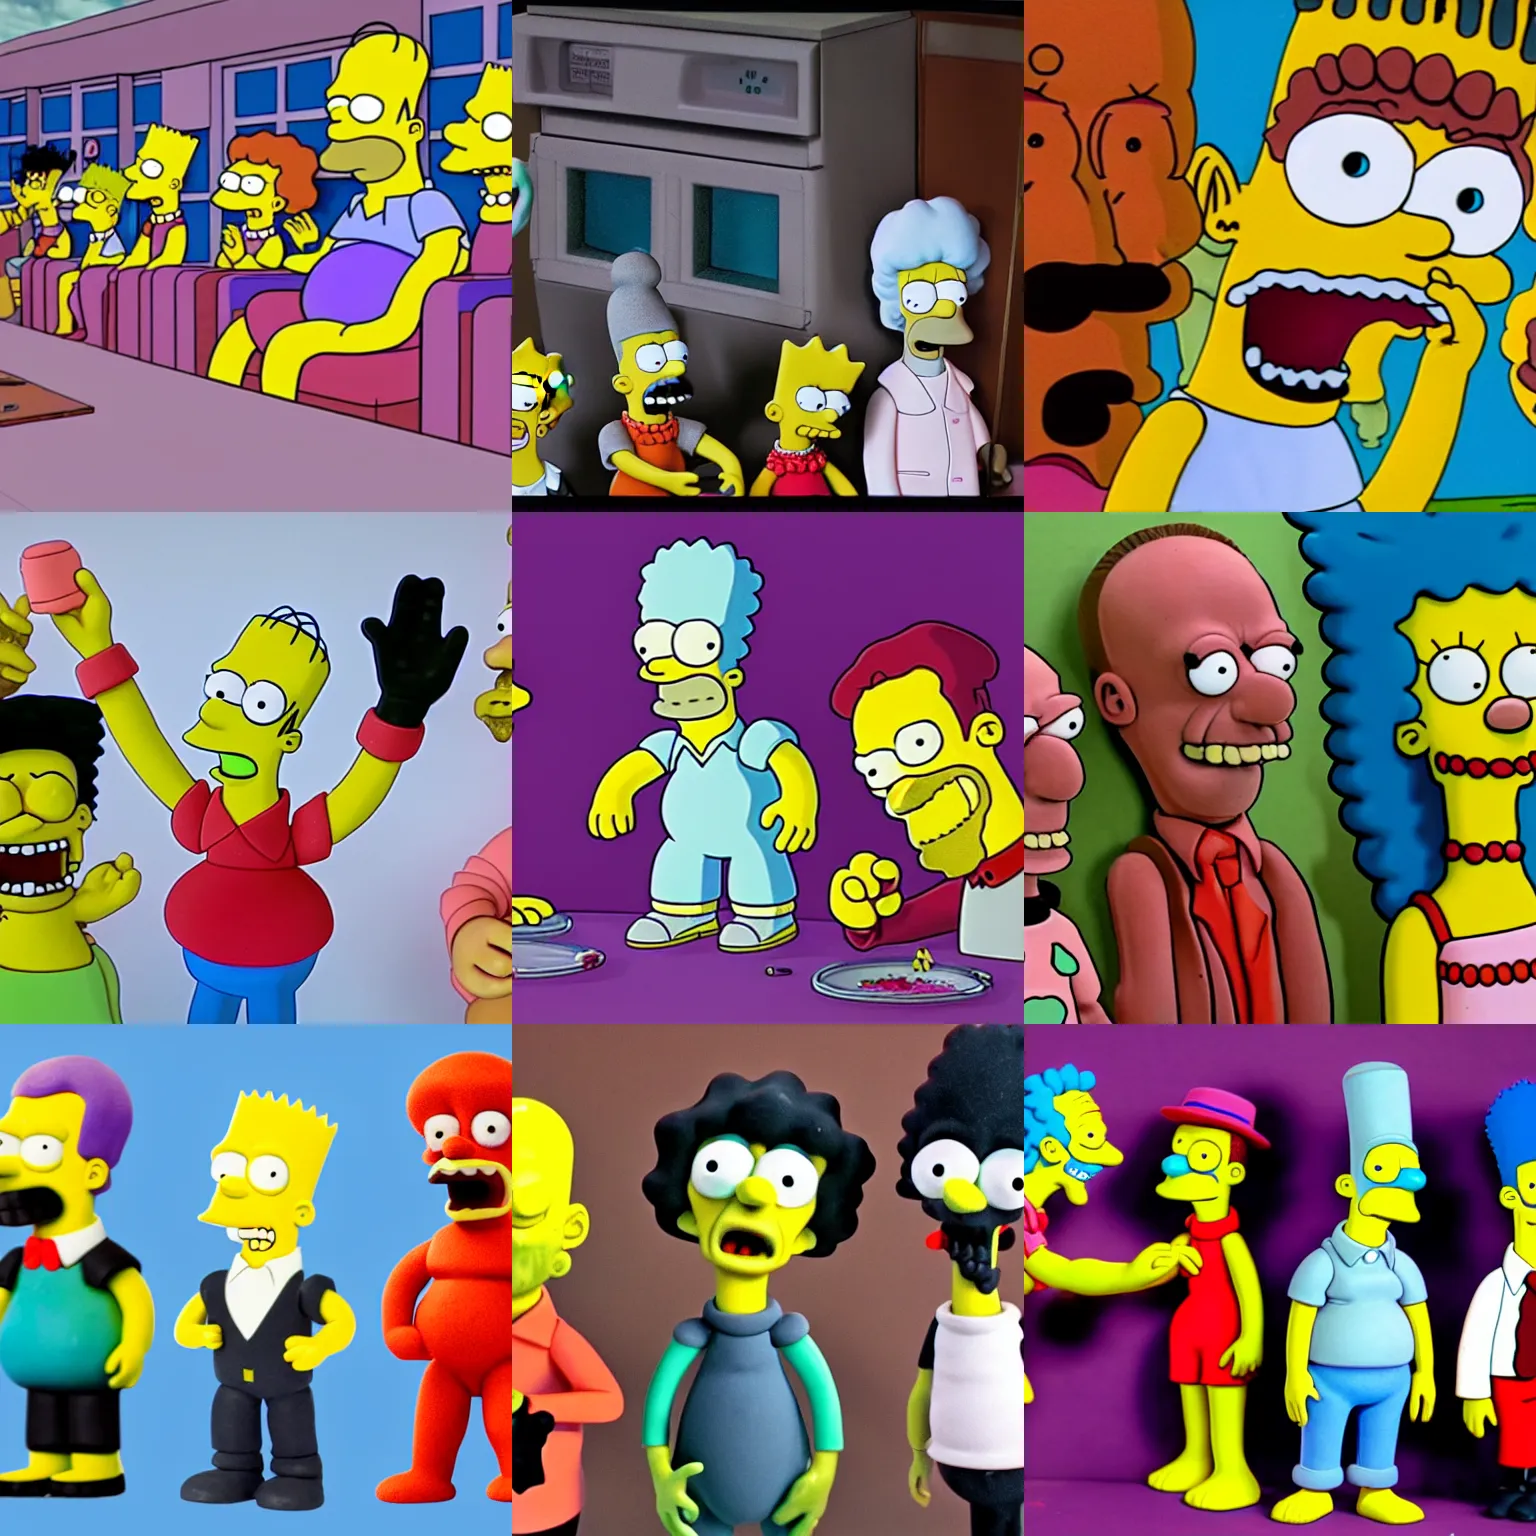 Prompt: simpsons claymation, creepy, jack stauber, david firth, messy clay